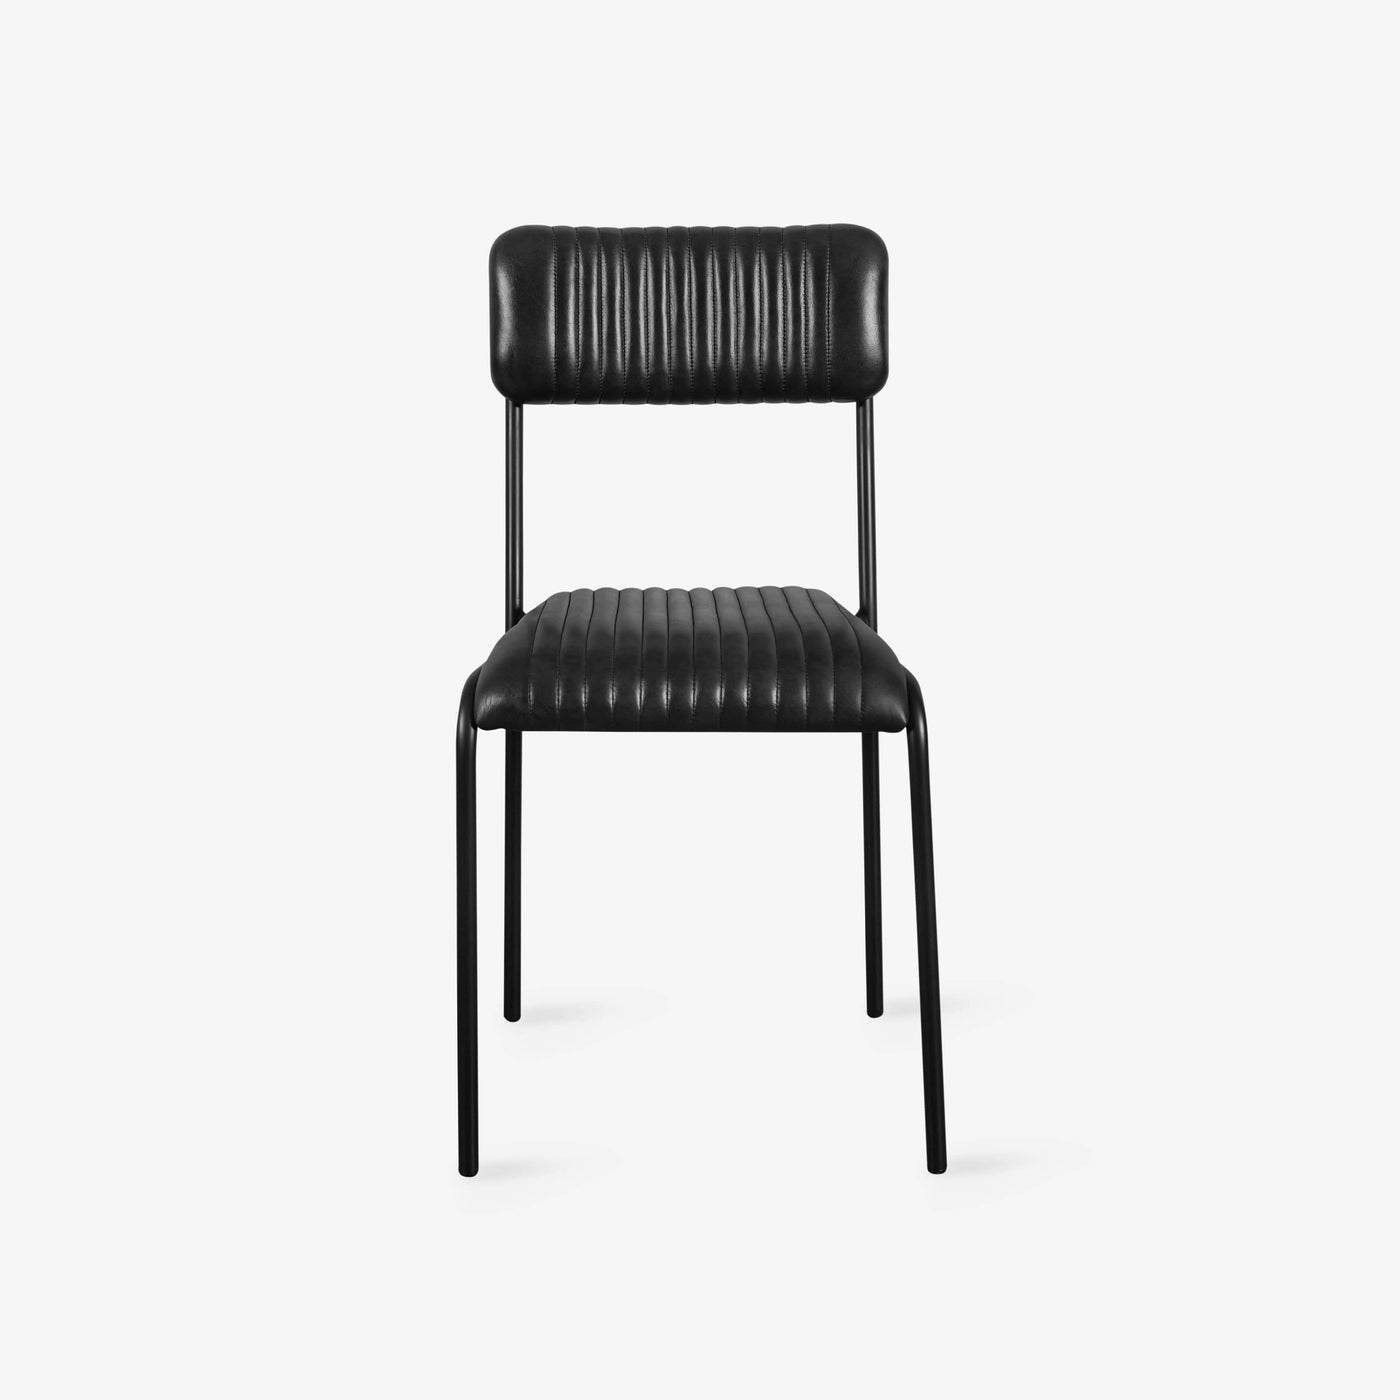 Basil Pleated Leather Dining Chair, Black Dining Chairs & Benches sazy.com